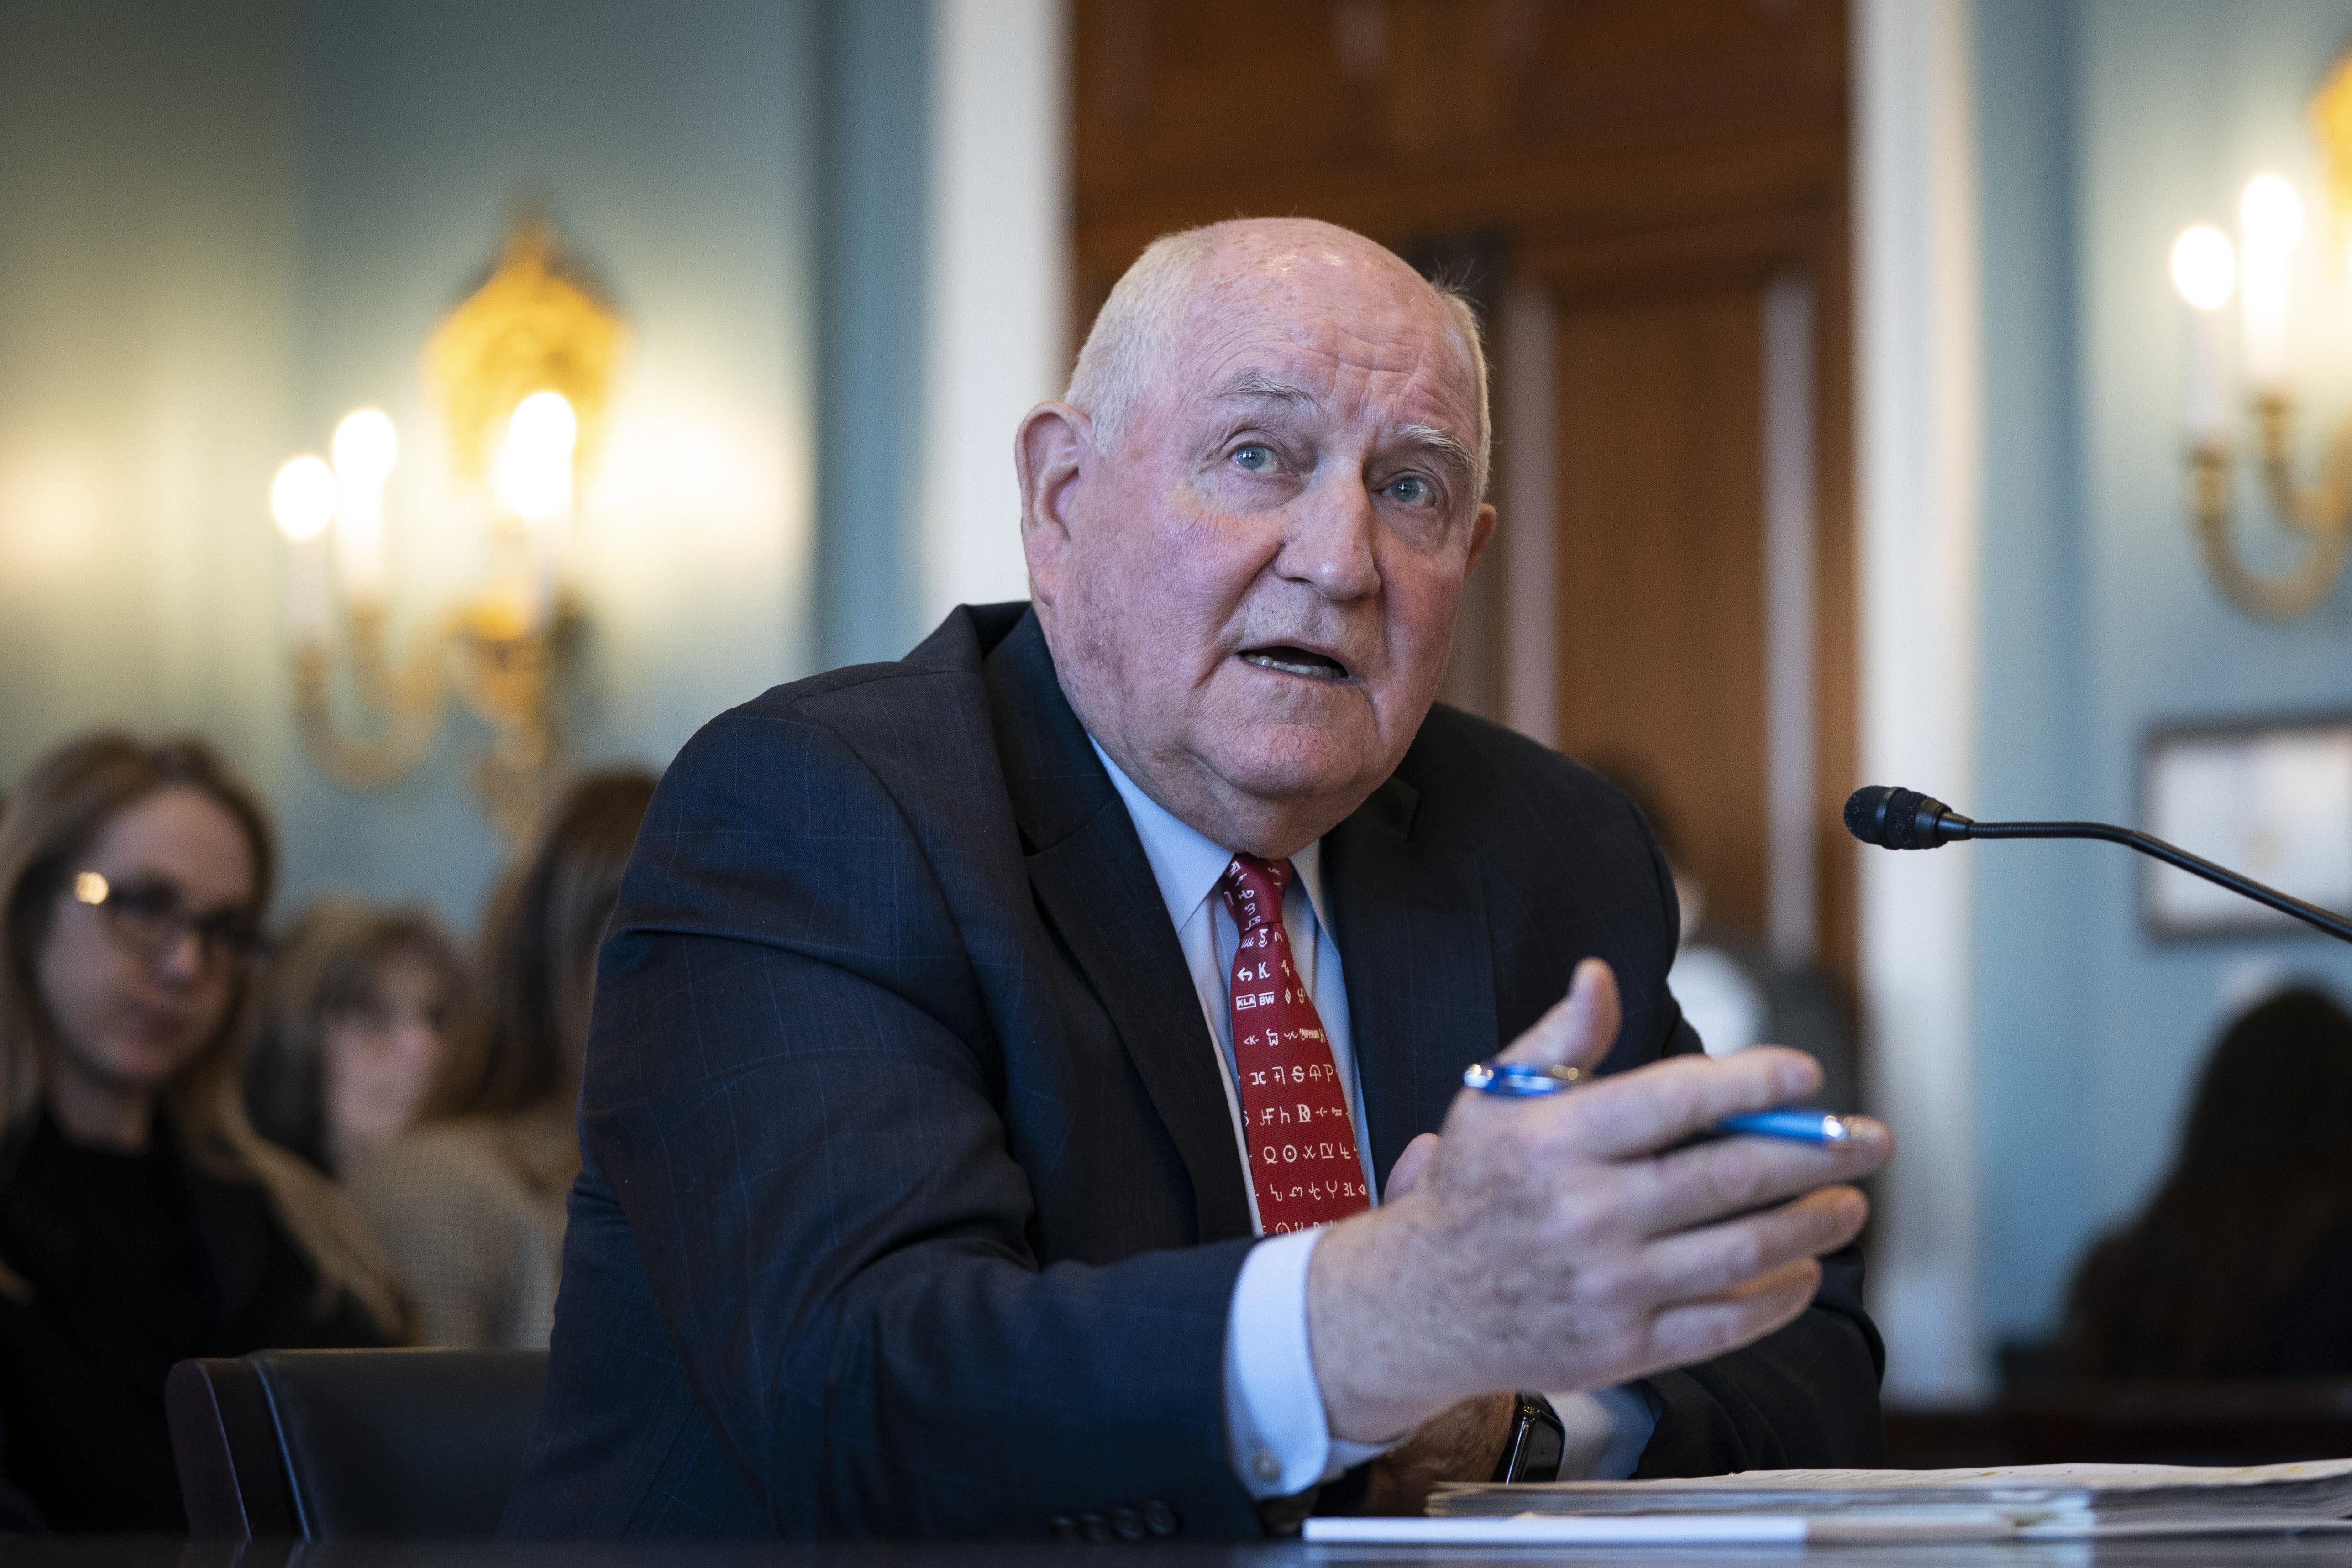 Sonny Perdue gestures with his hand as he speaks at a desk.